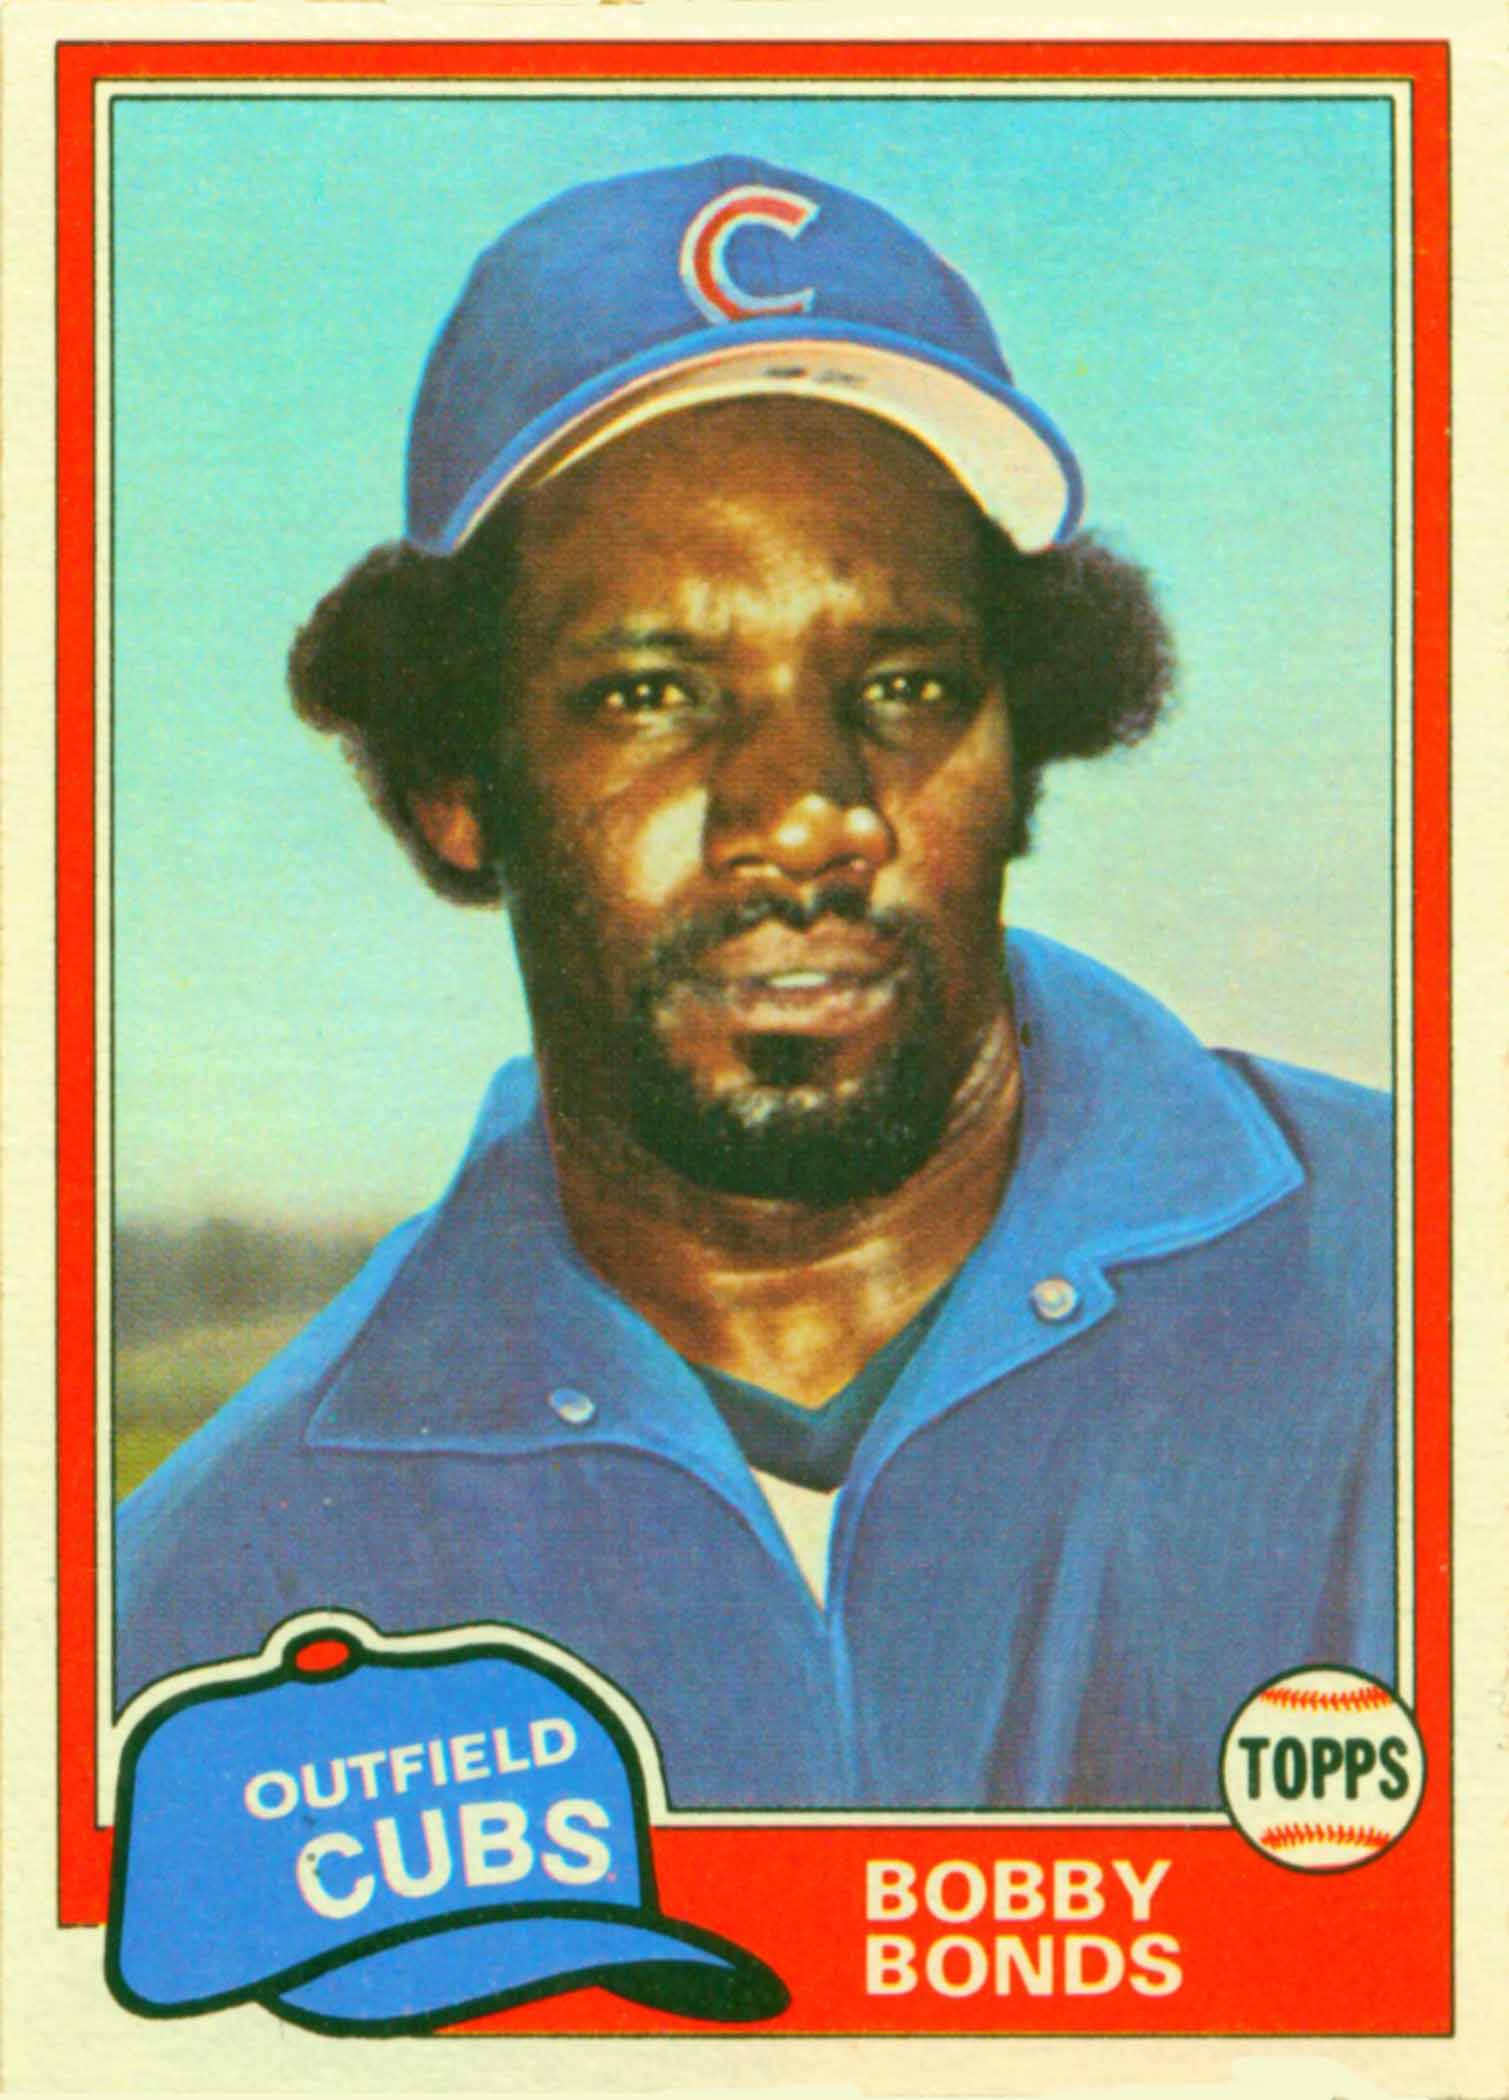 1981 Topps Traded